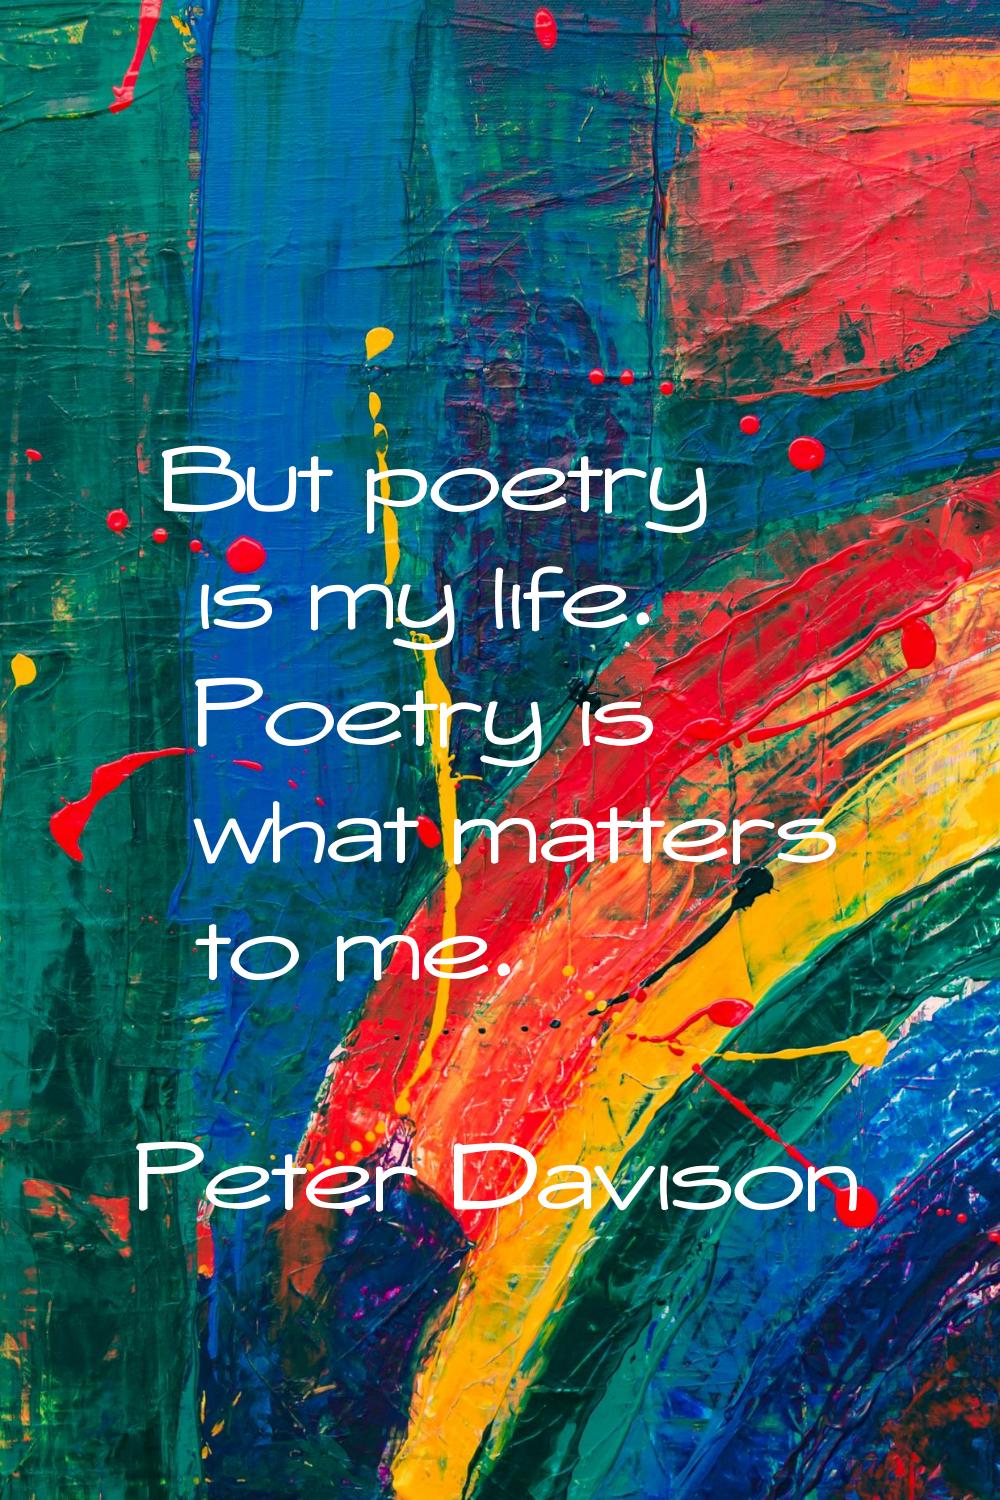 But poetry is my life. Poetry is what matters to me.